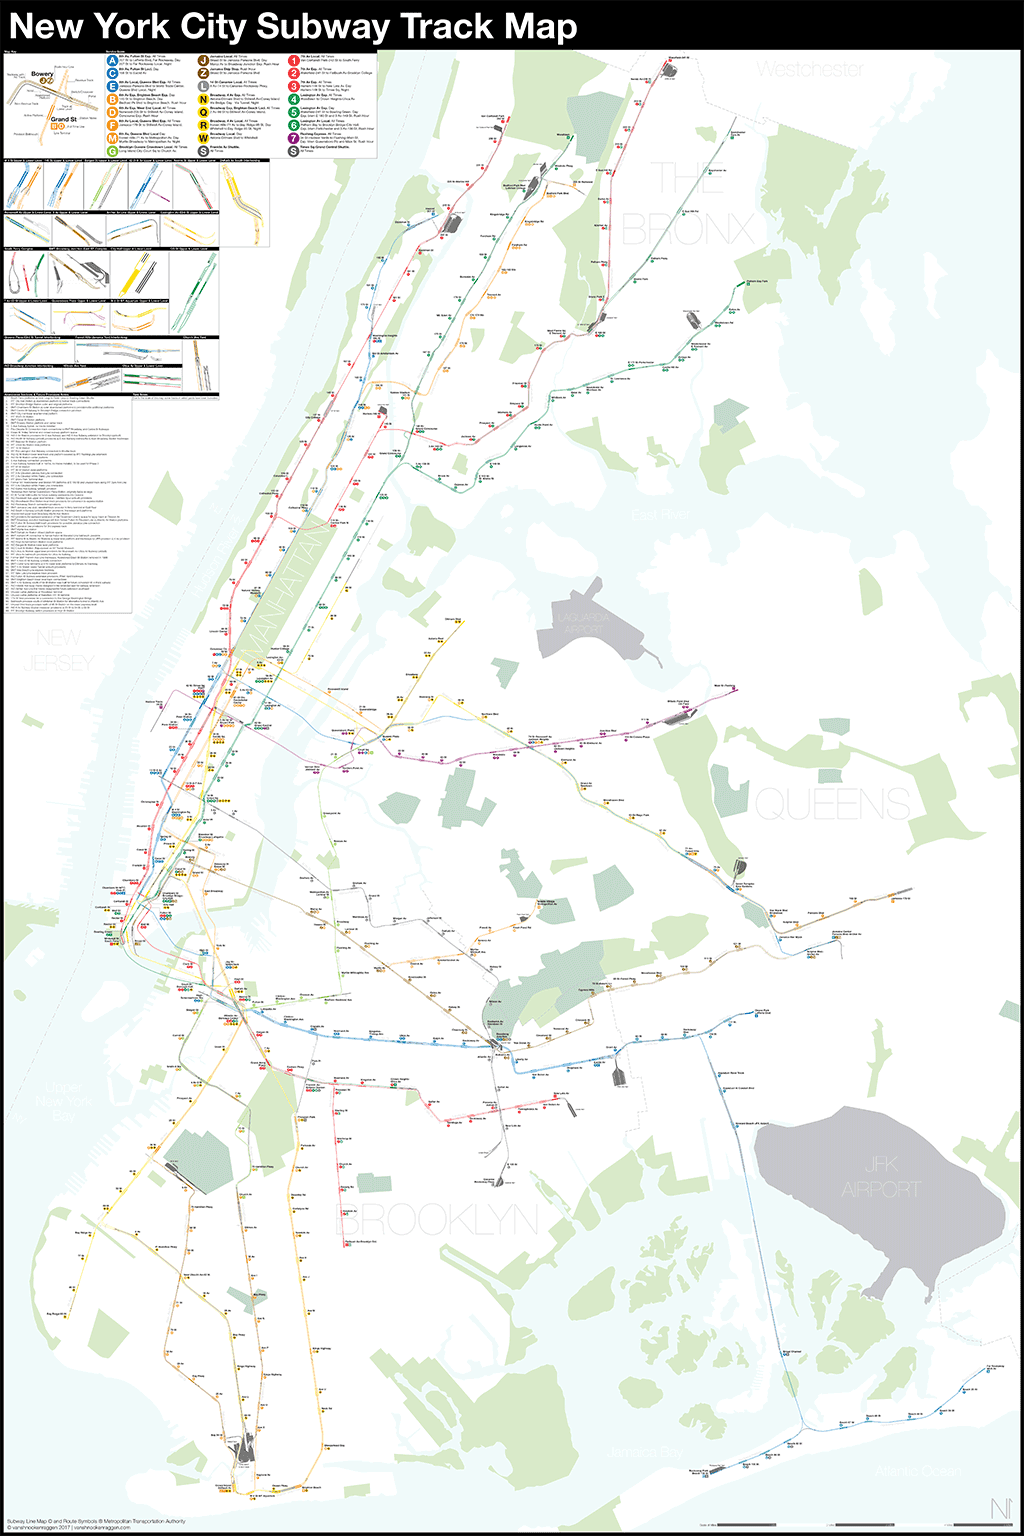 Nyc Subway Track Maps A Complete and Geographically Accurate NYC Subway Track Map 